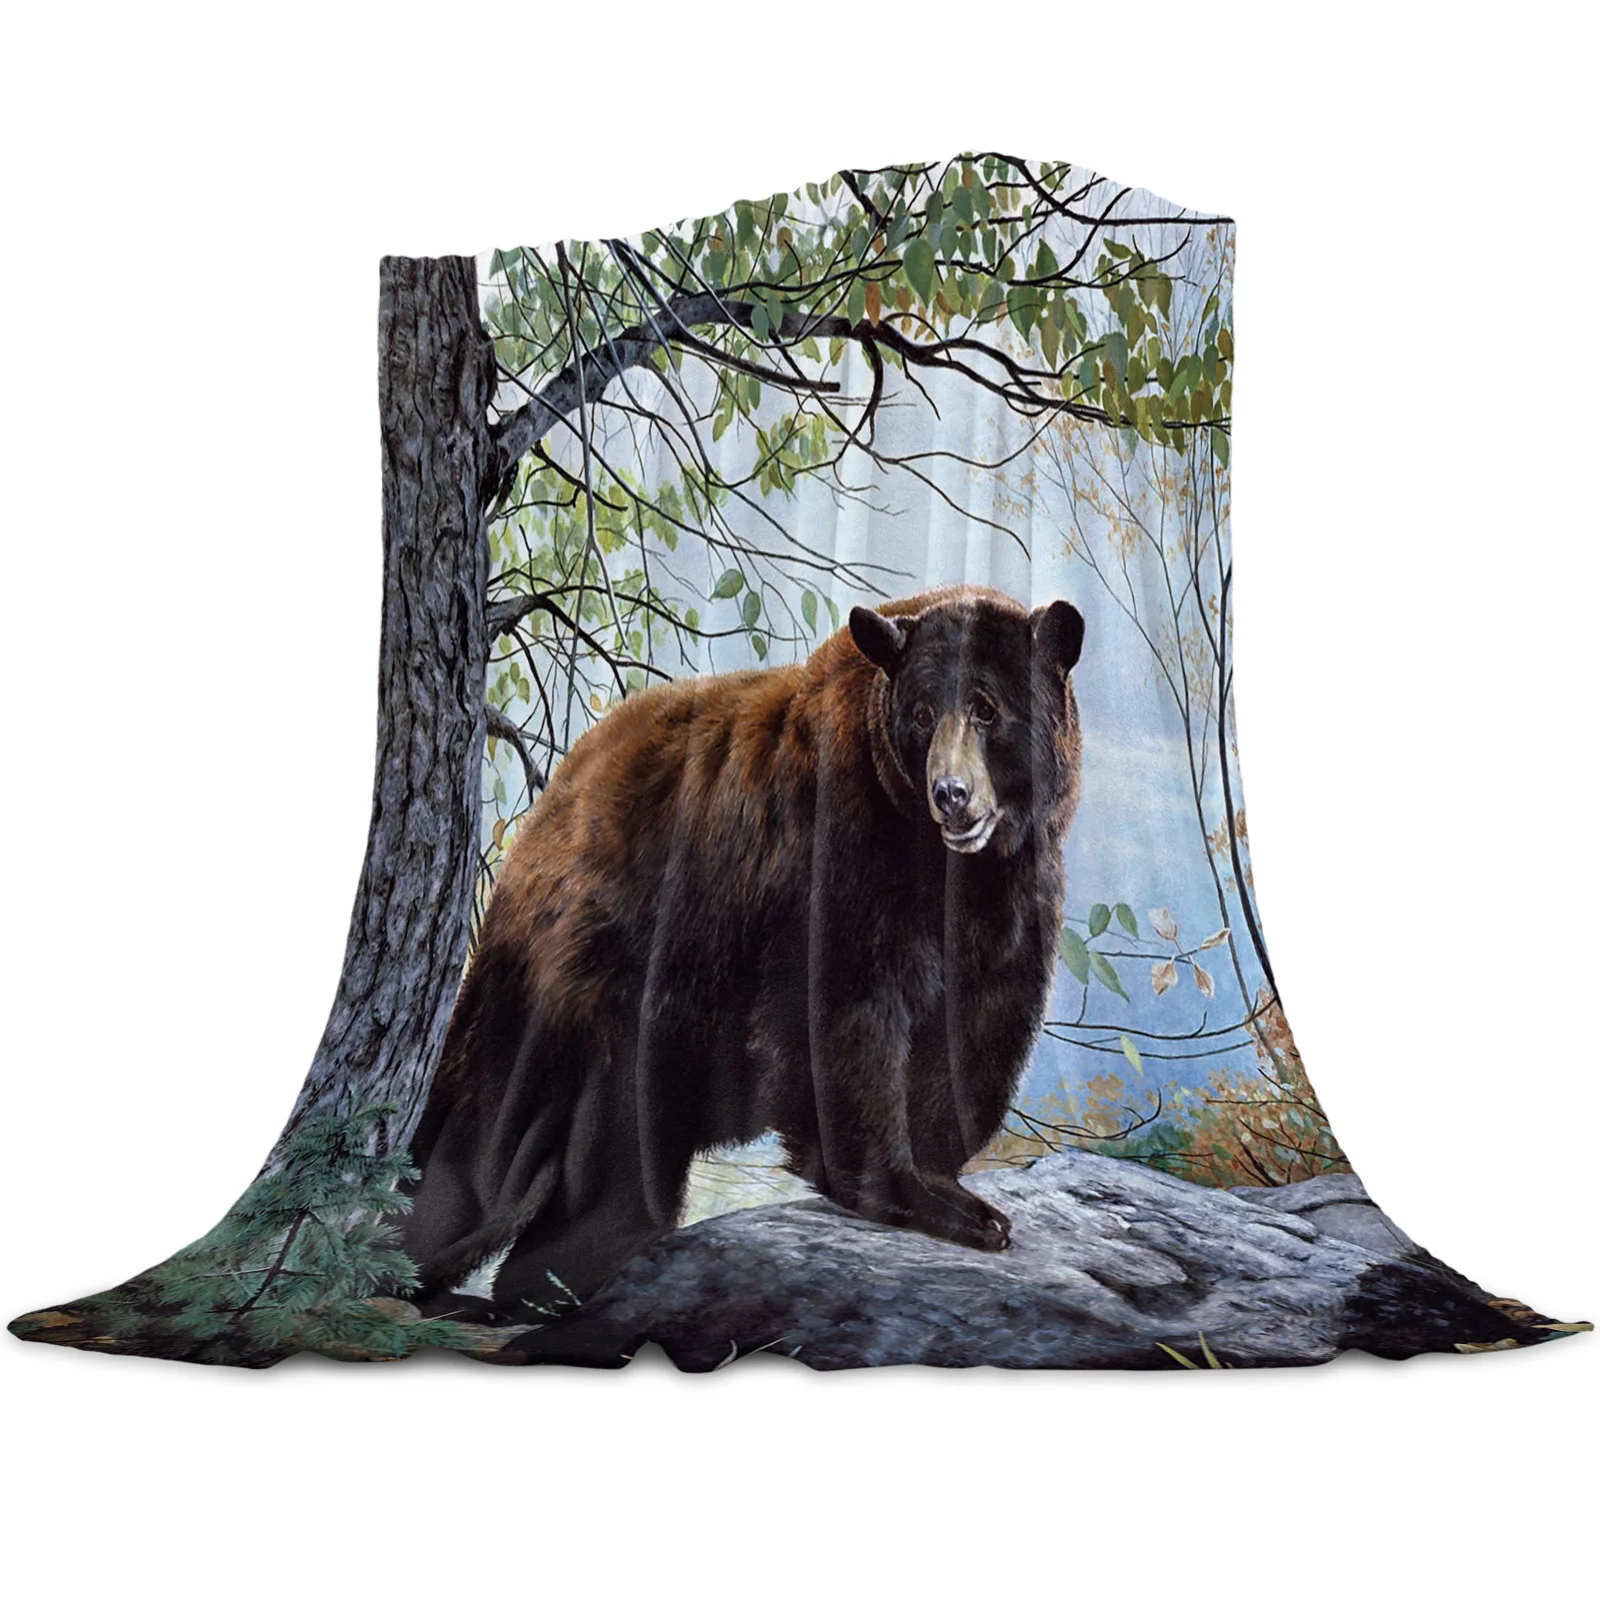 

Story Book and Bear on Ladder to Sky Nap Super Soft Cozy Throw Blanket Warm Bedspread Travel Sofa Cover Flannel Blankets